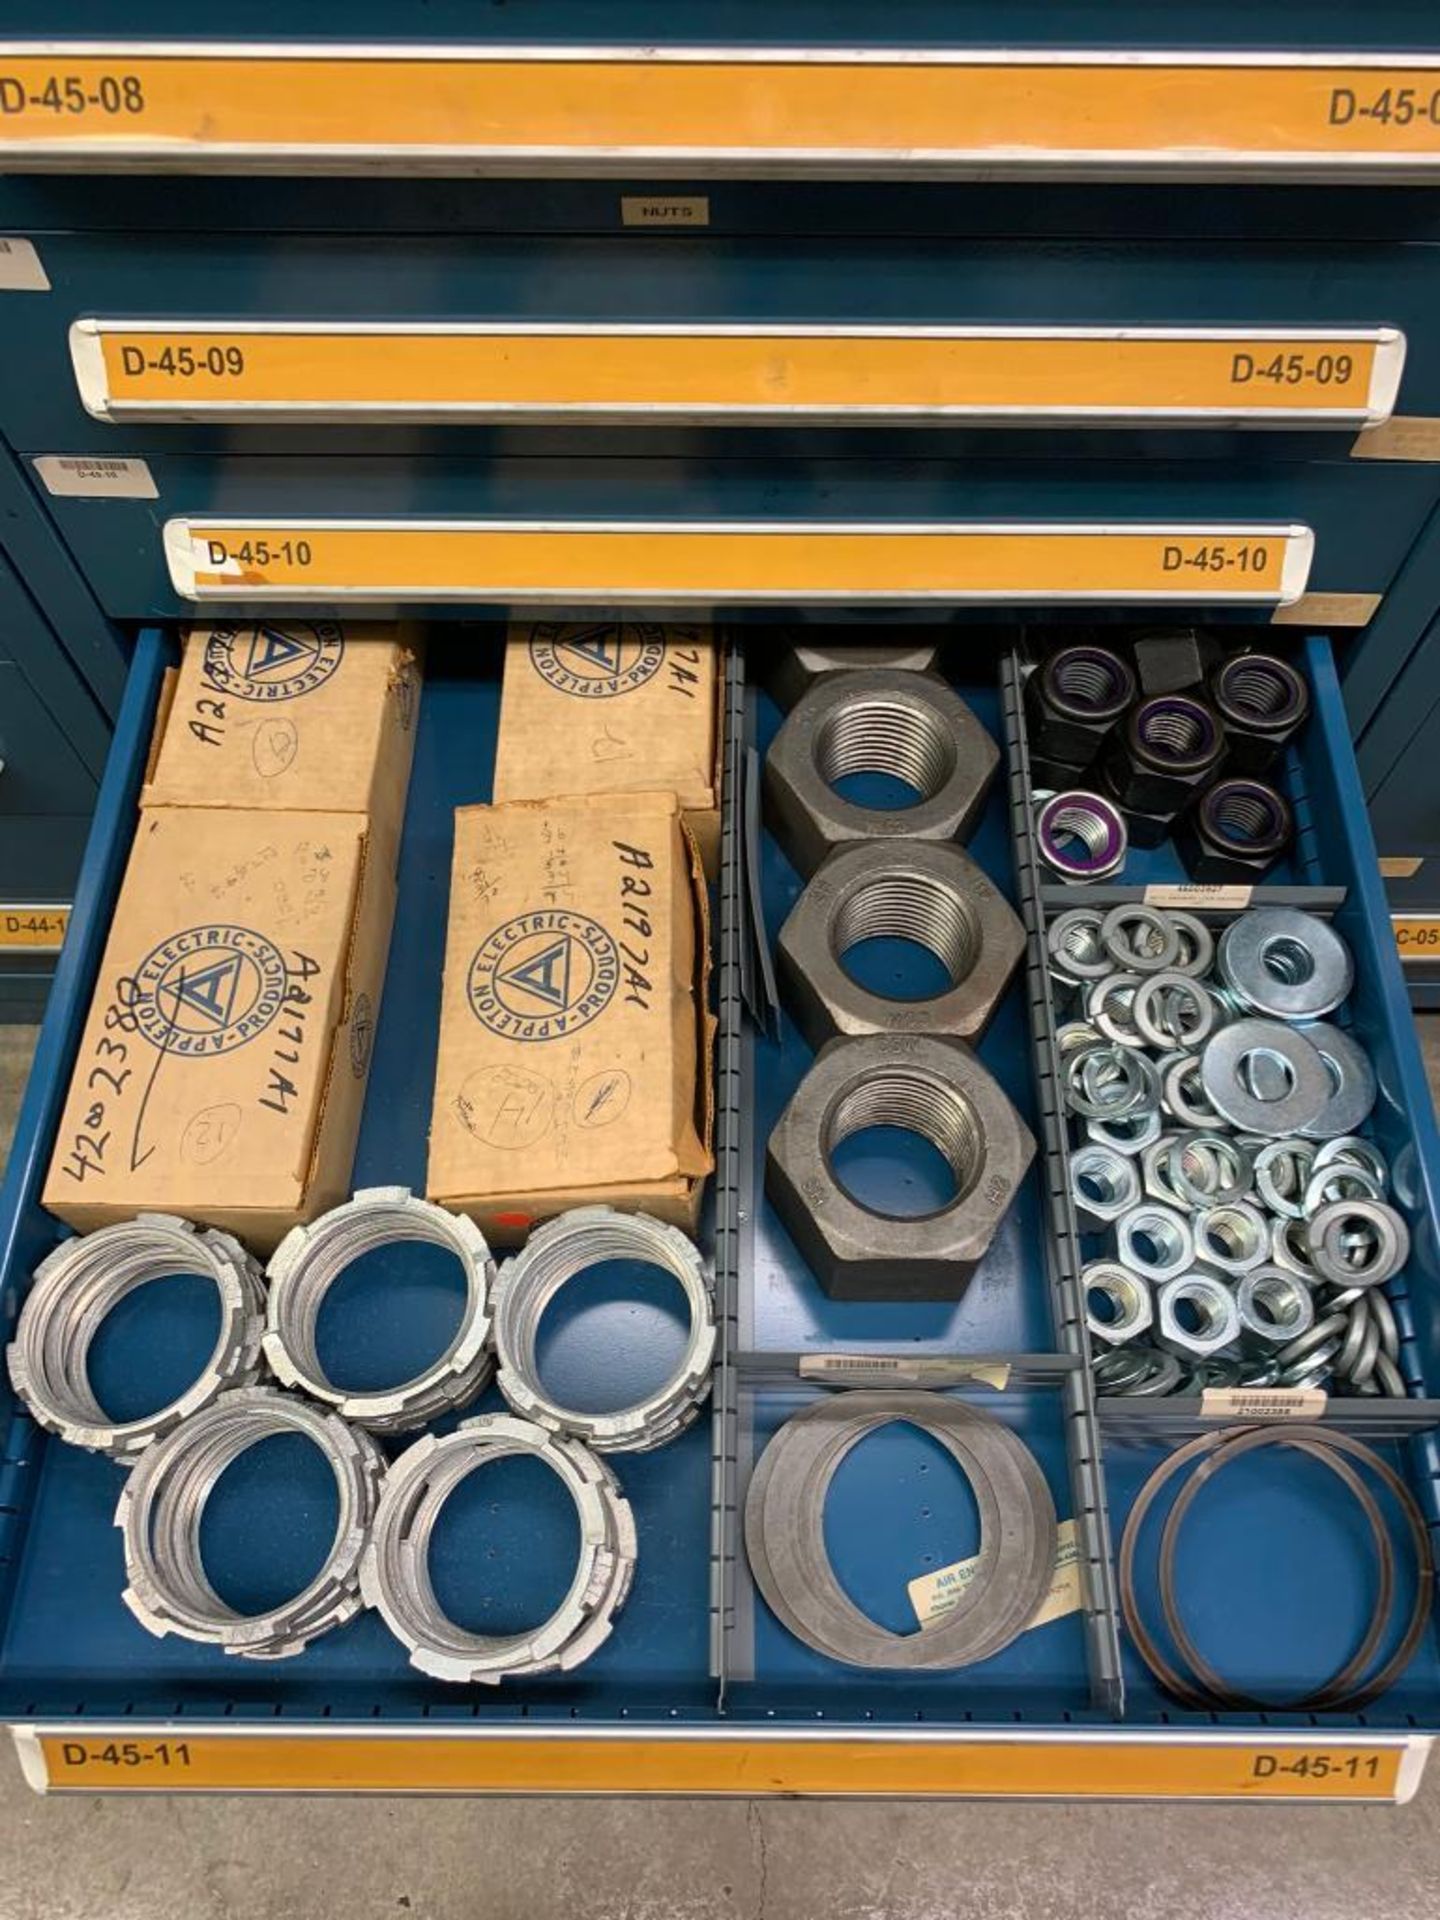 Vidmar 13-Drawer Cabinet w/ Assorted O-Rings, Retaining Clips, Nuts, Legend Plates, Concrete Anchors - Image 17 of 20